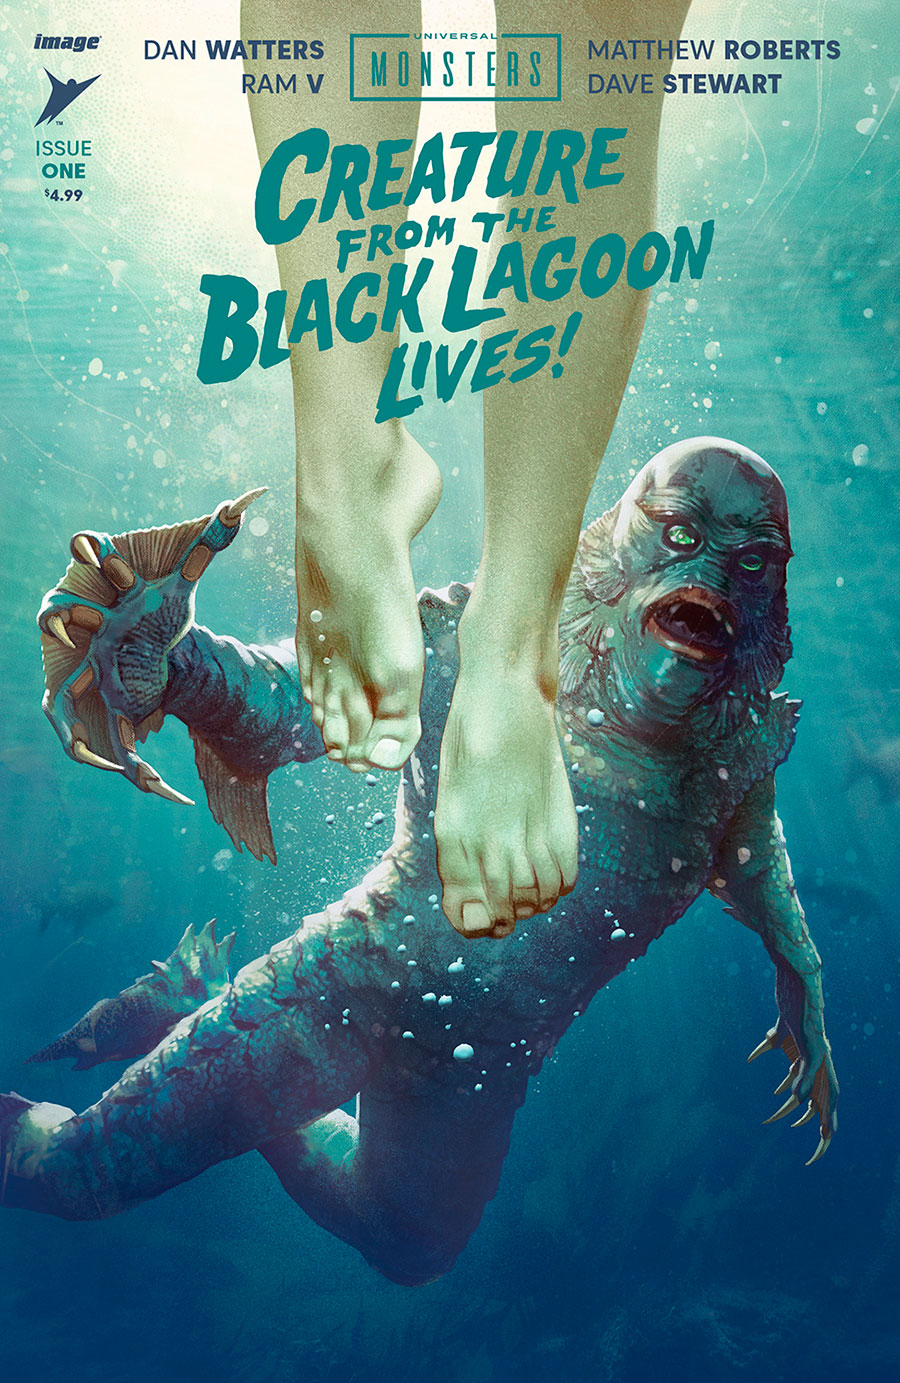 Universal Monsters Creature From The Black Lagoon Lives #1 Cover B Variant Joshua Middleton Cover